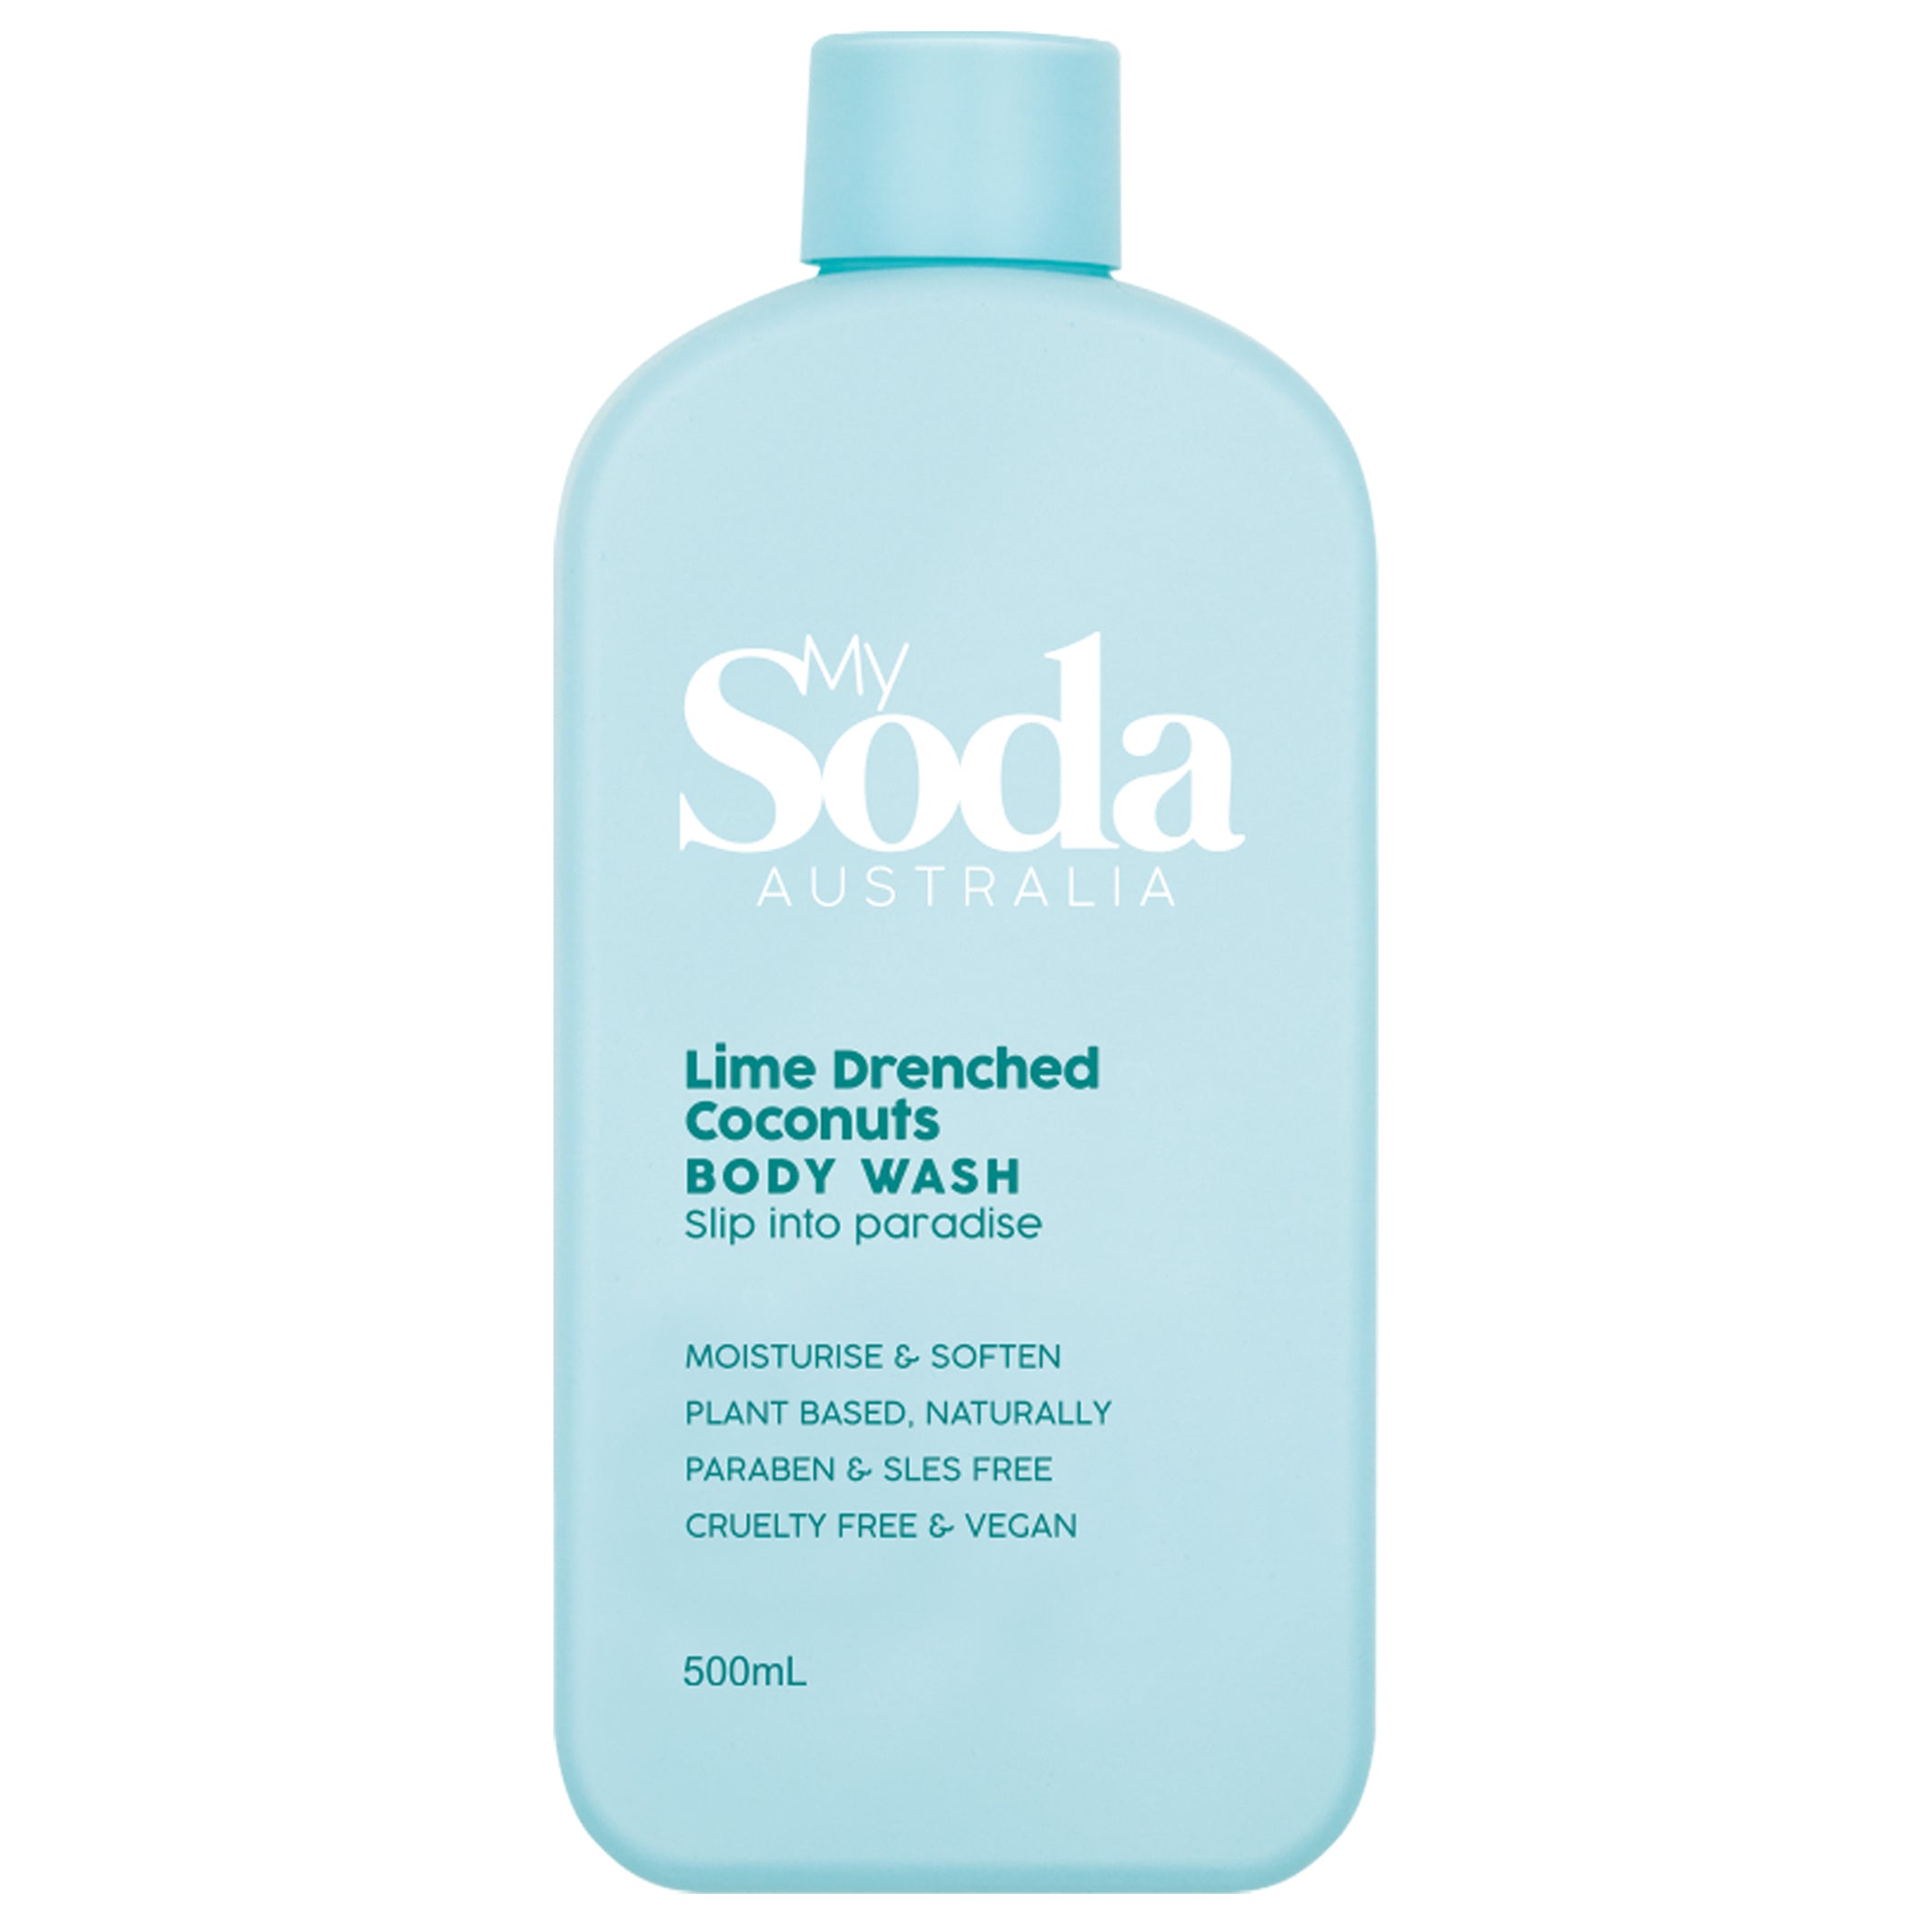 Lime Drenched Coconuts Body Wash 500ml